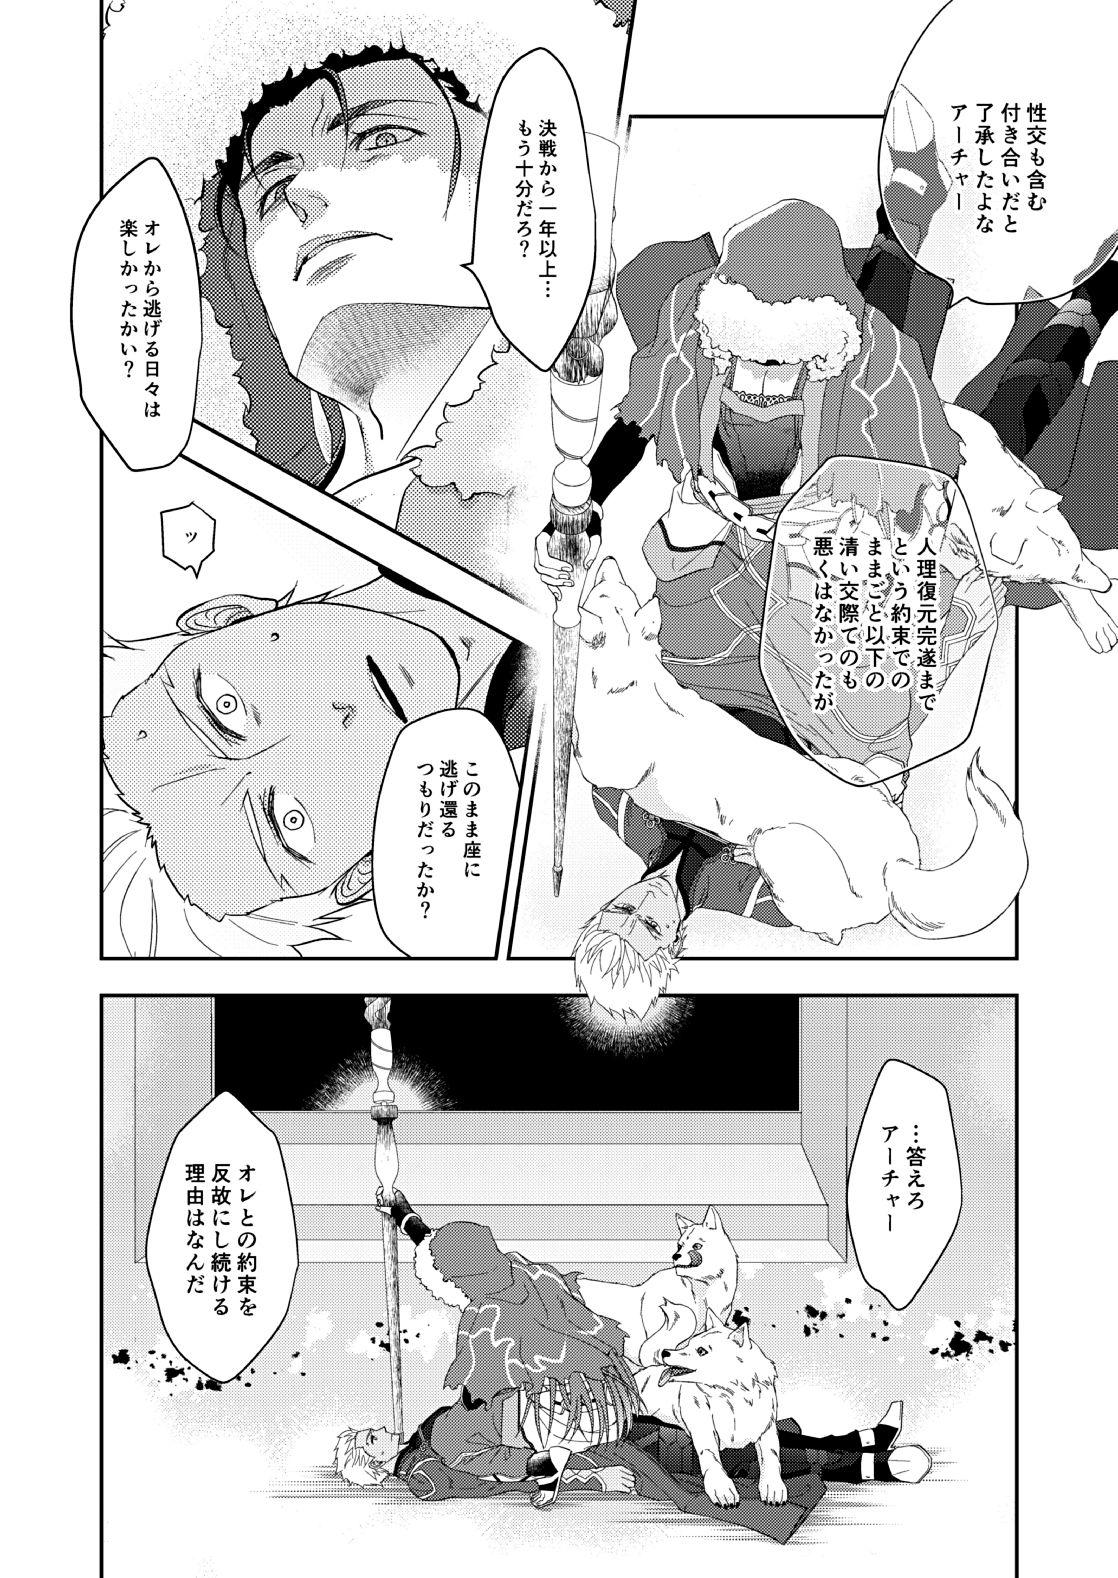 Puto deification - Fate grand order This - Page 8